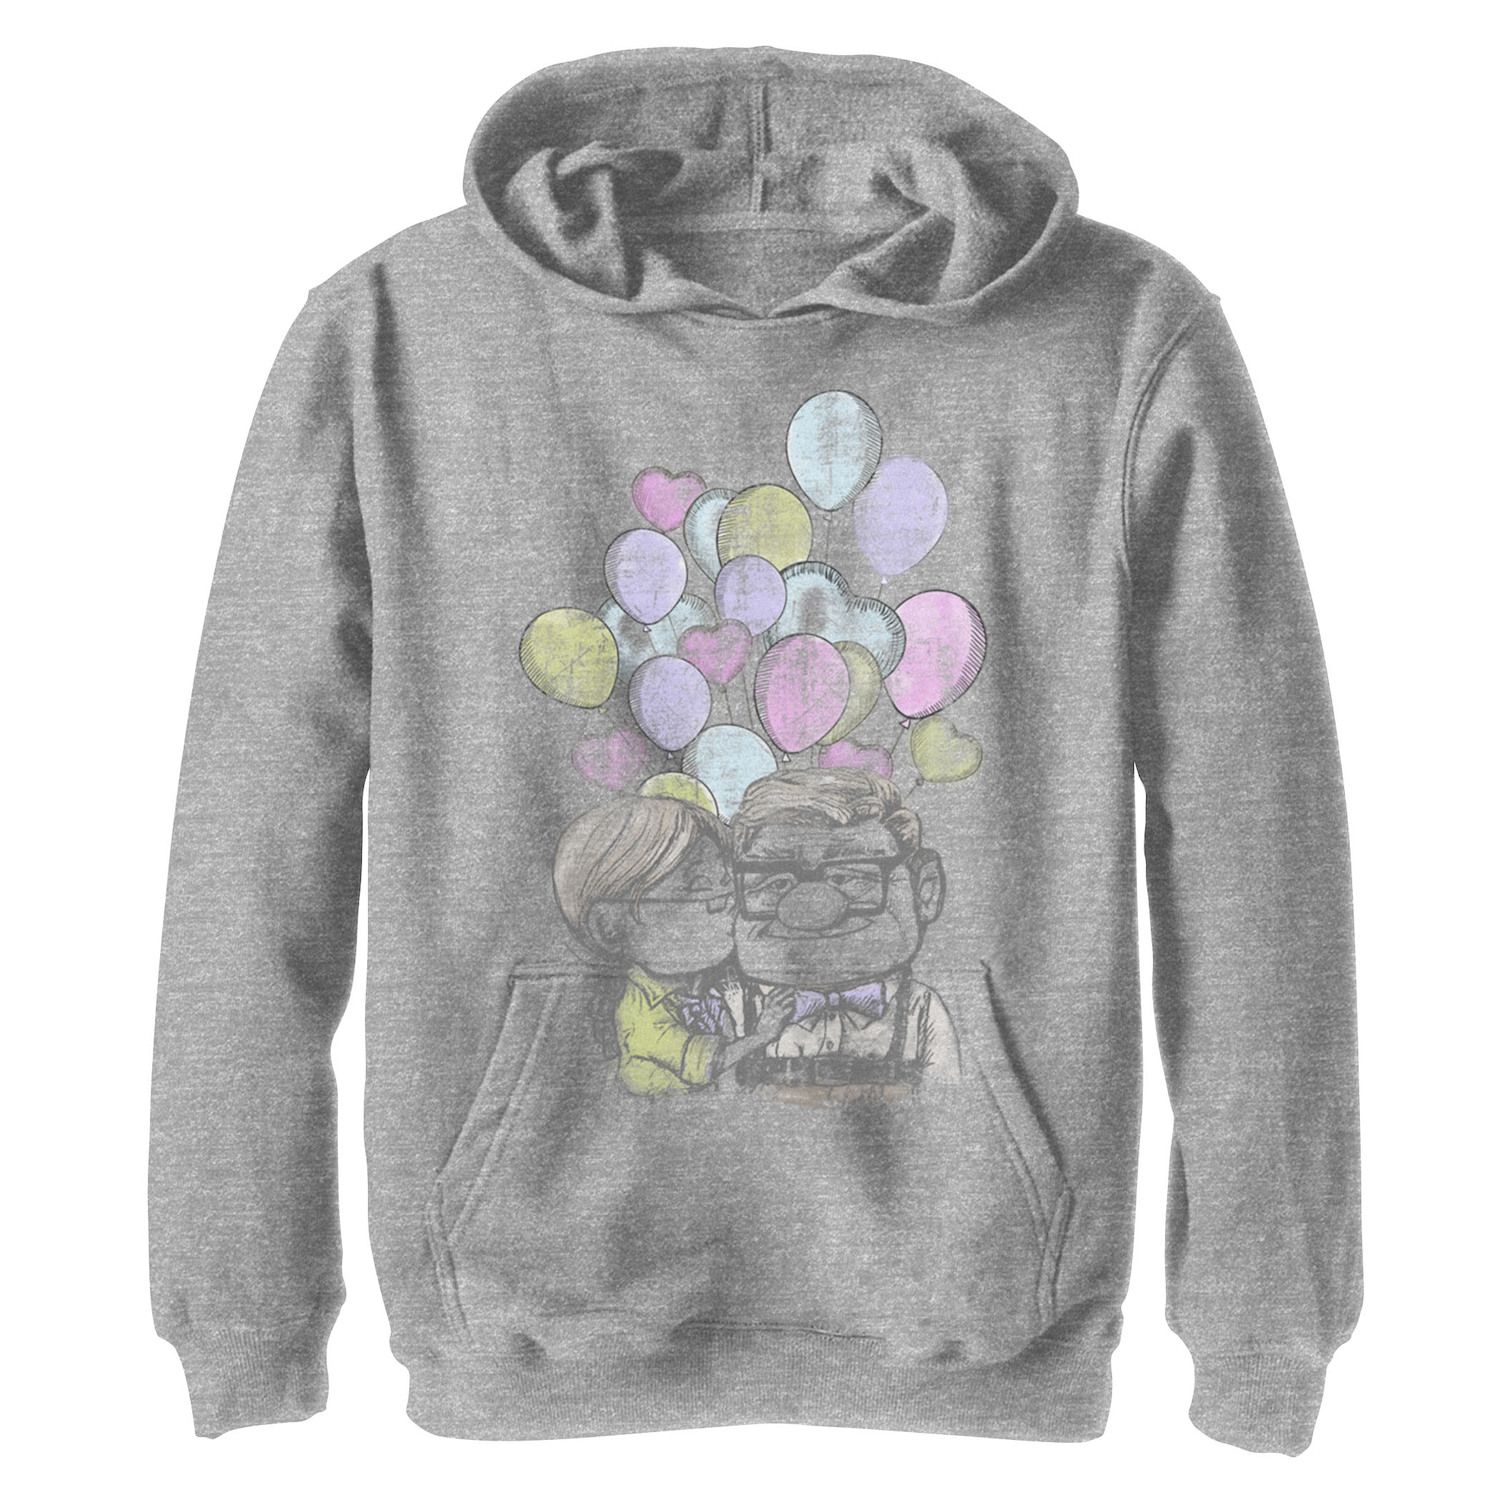 Image for Disney / Pixar 's Up Boys 8-20 Carl And Ellie Love Graphic Fleece Hoodie at Kohl's.